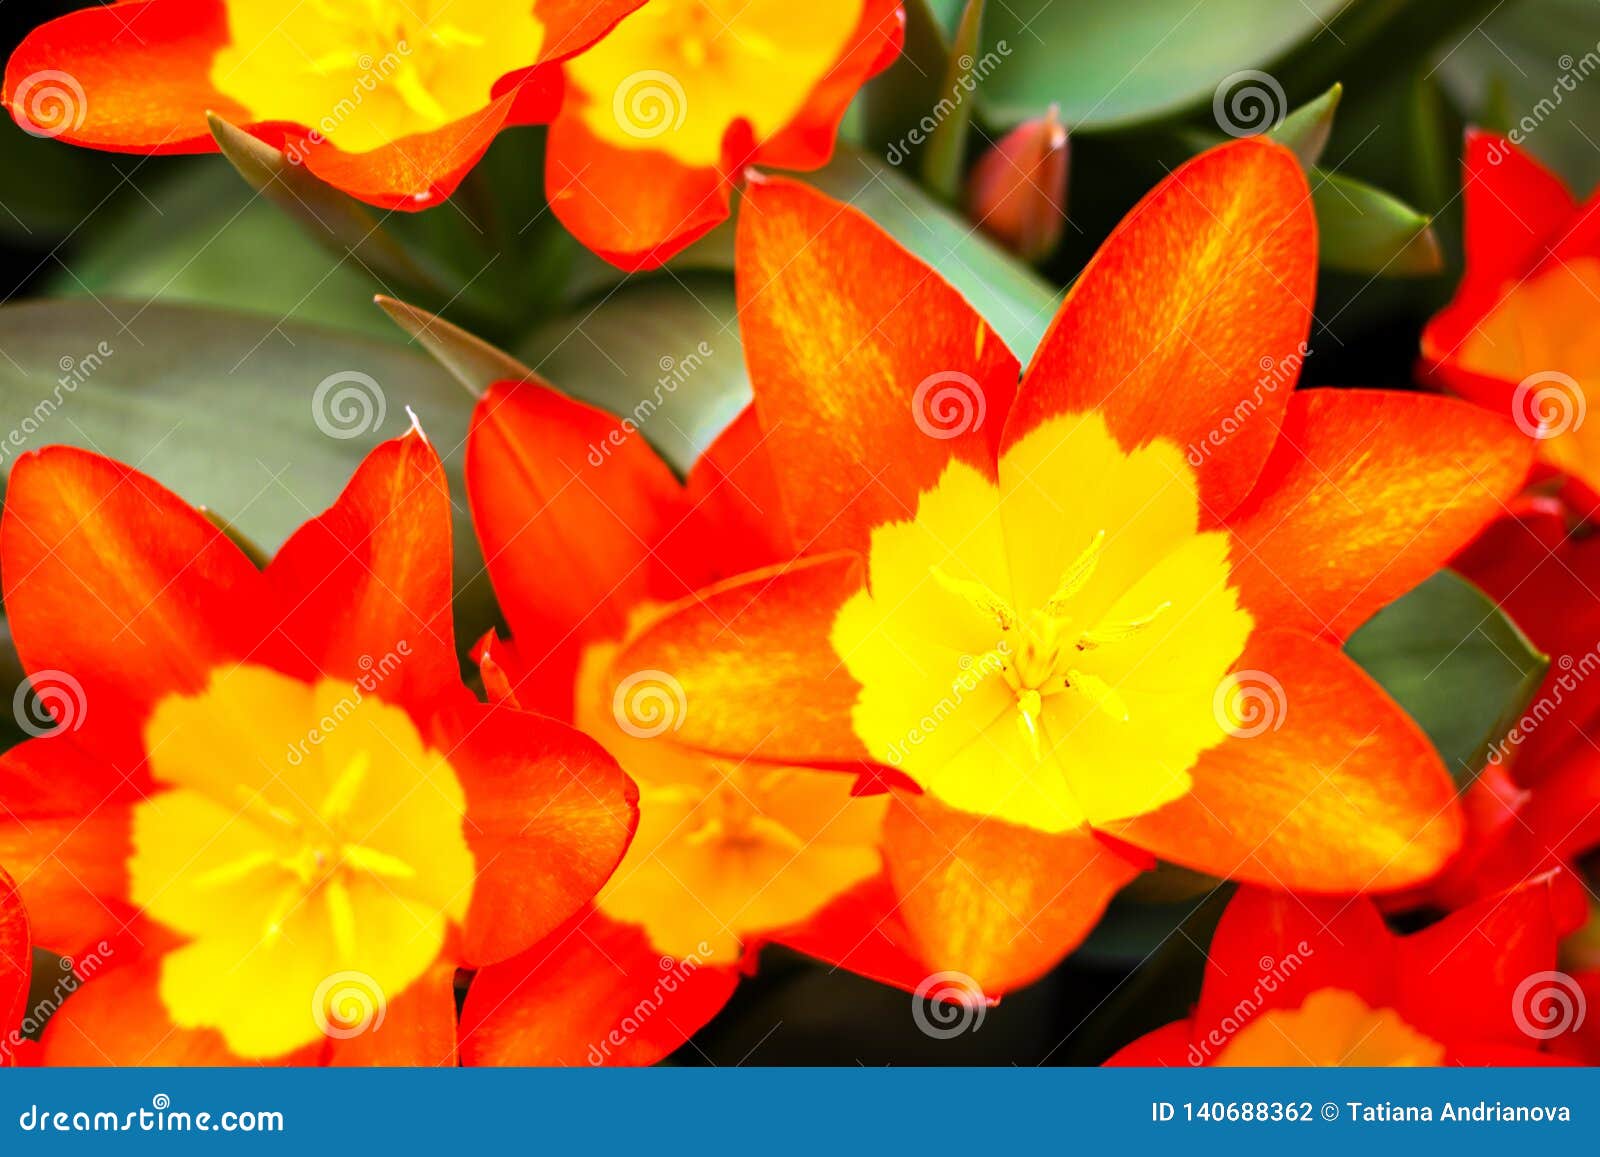 Blooming Tulips Juan Kind With Yellow And Red Petals, Beautiful Spring ...